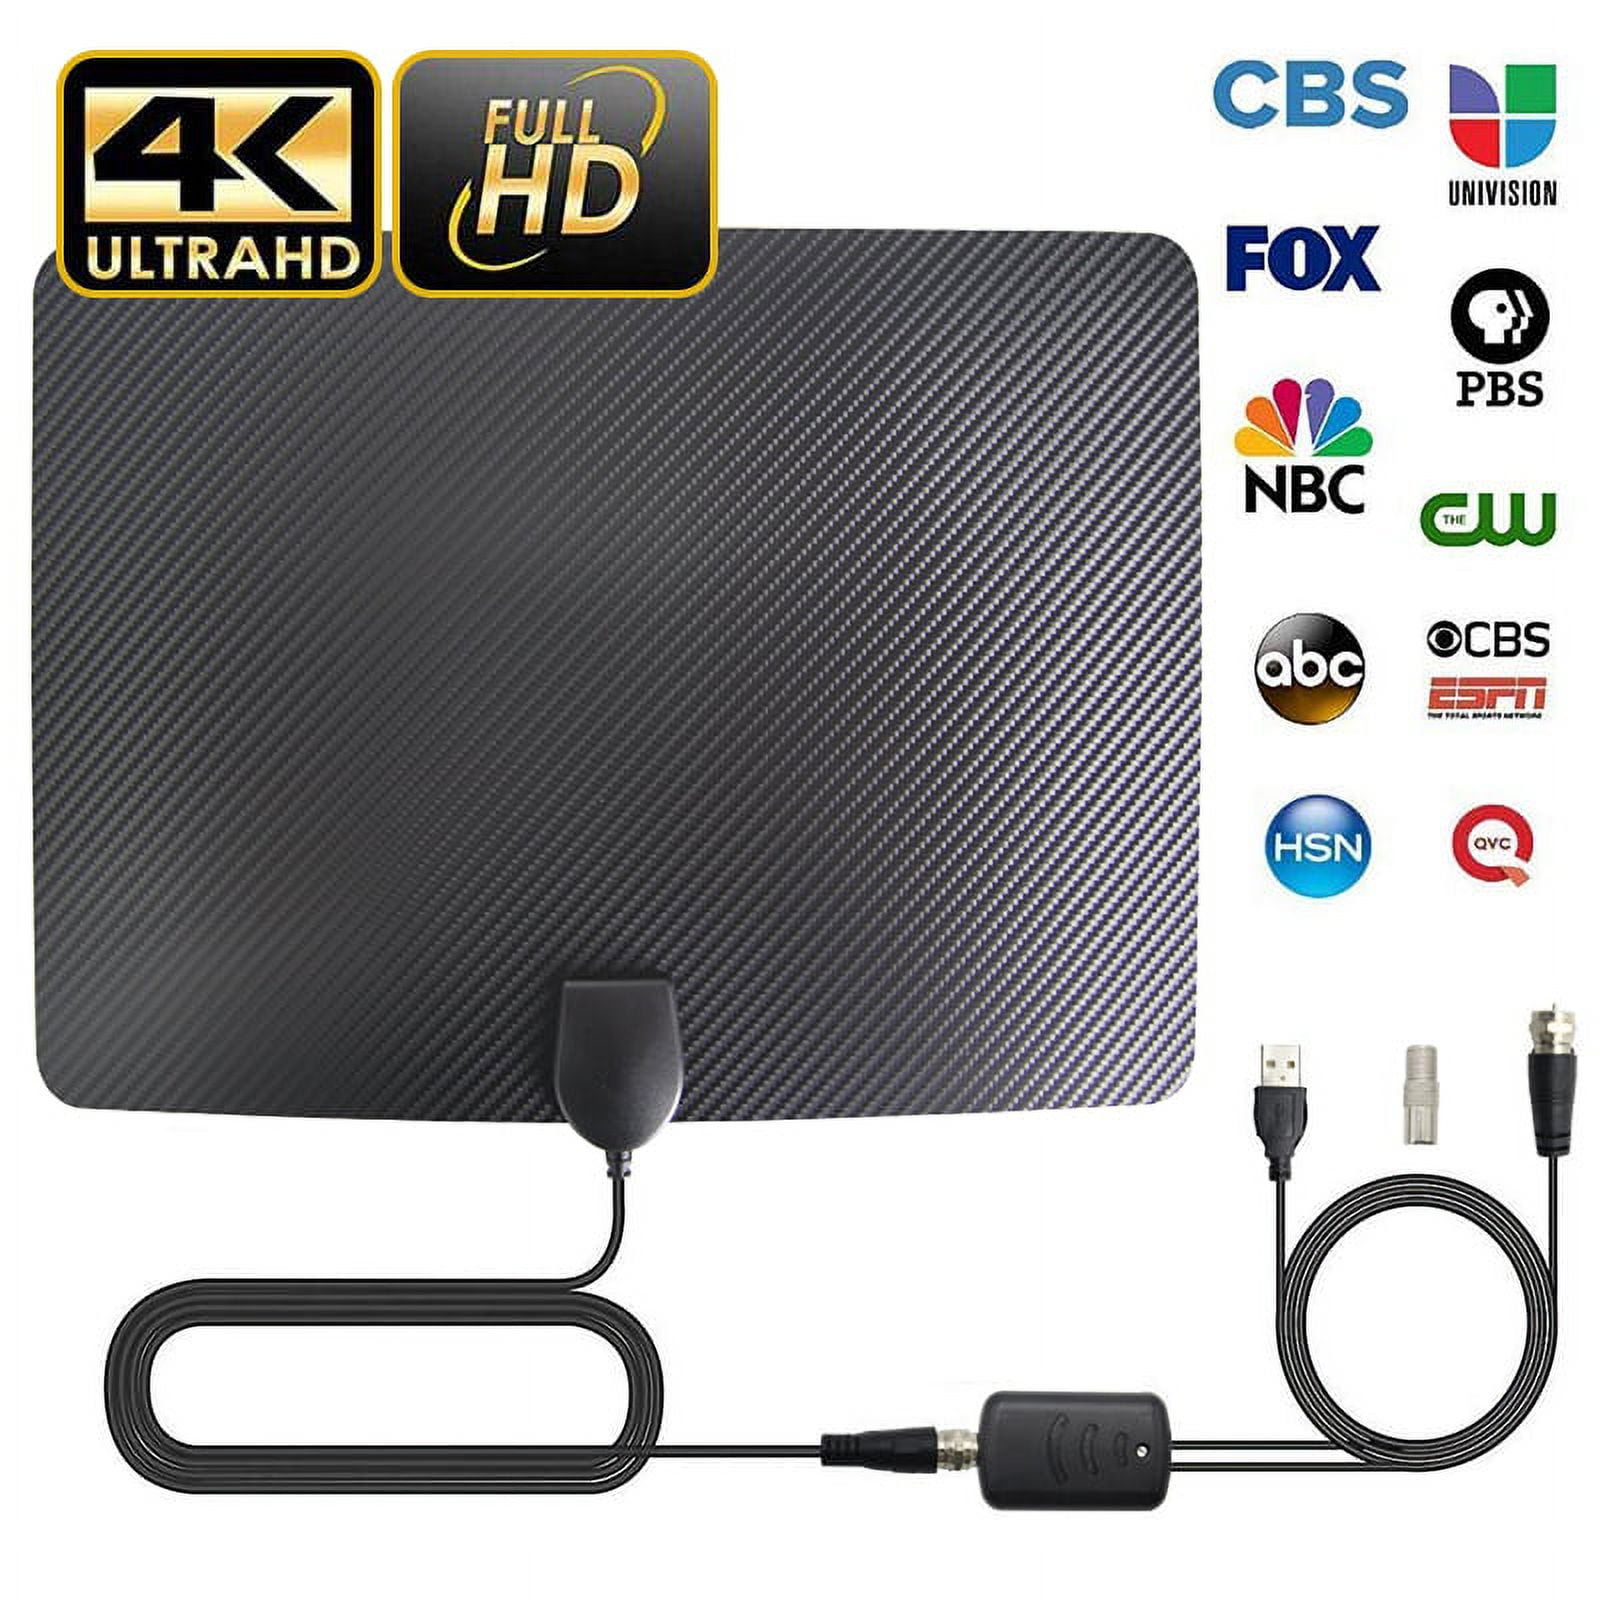 Digital TV Antenna - 110 Miles HDTV Antenna Digital Indoor Antenna with  Detachable Signal Booster VHF UHF High Gain Channels Reception For 4K 1080P  Free TV Channels 